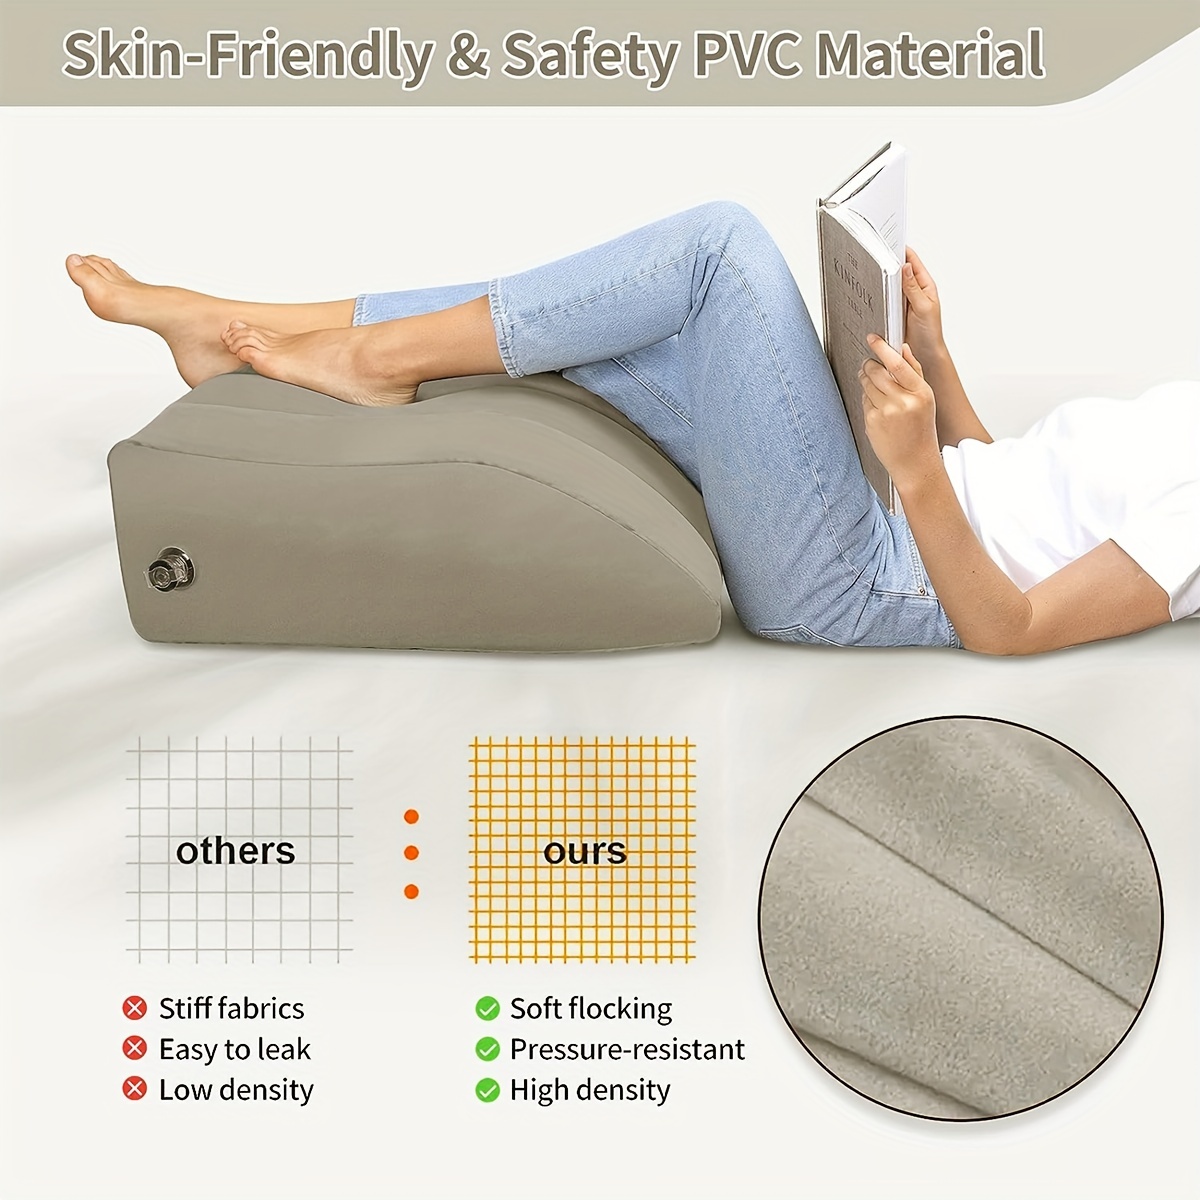 Leg Elevation Pillow,Inflatable Wedge Pillows,Comfort Leg Pillows for  Sleeping,Improve Circulataion and Reduce Swelling,Suitable for improving  Sleep